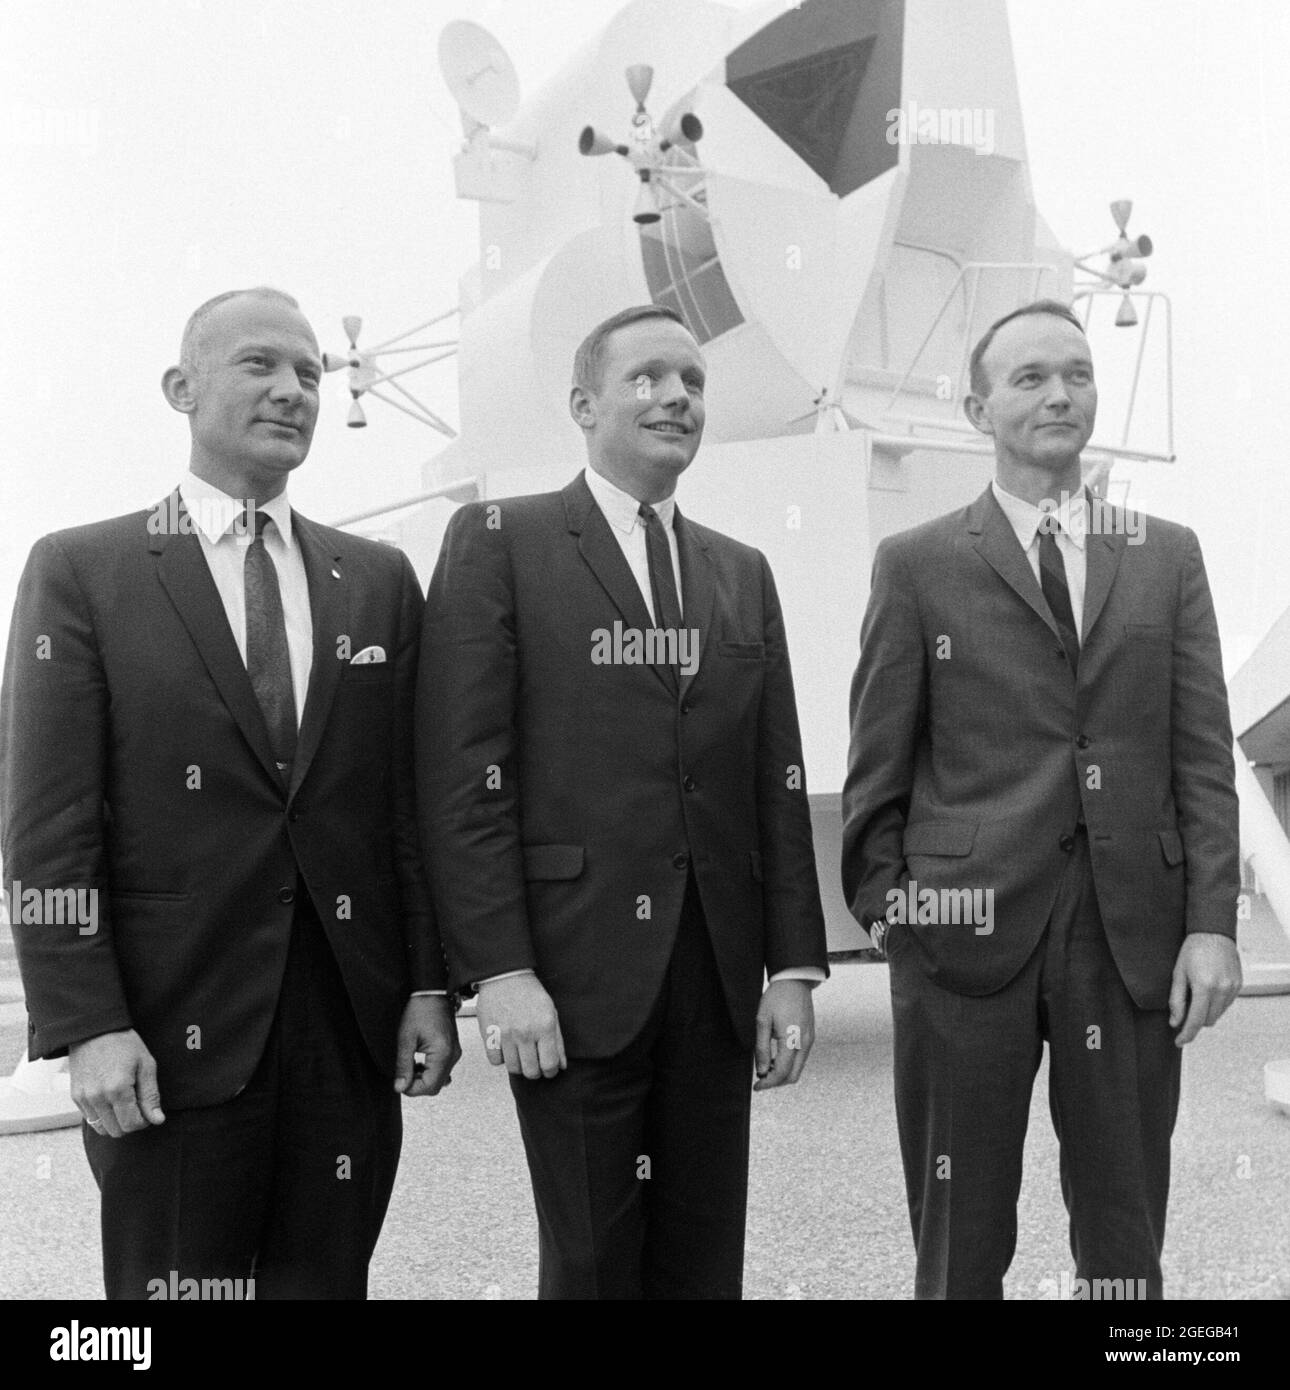 (10 Jan. 1969) --- These three astronauts have been selected by NASA as the prime crew of the Apollo 11 lunar landing mission. Left to right, are Edwin E. Aldrin Jr., lunar module pilot; Neil A. Armstrong, commander; and Michael Collins, command module pilot. They are photographed in front of a lunar module mock-up beside Building 1 following a press conference in the MSC Auditorium Stock Photo